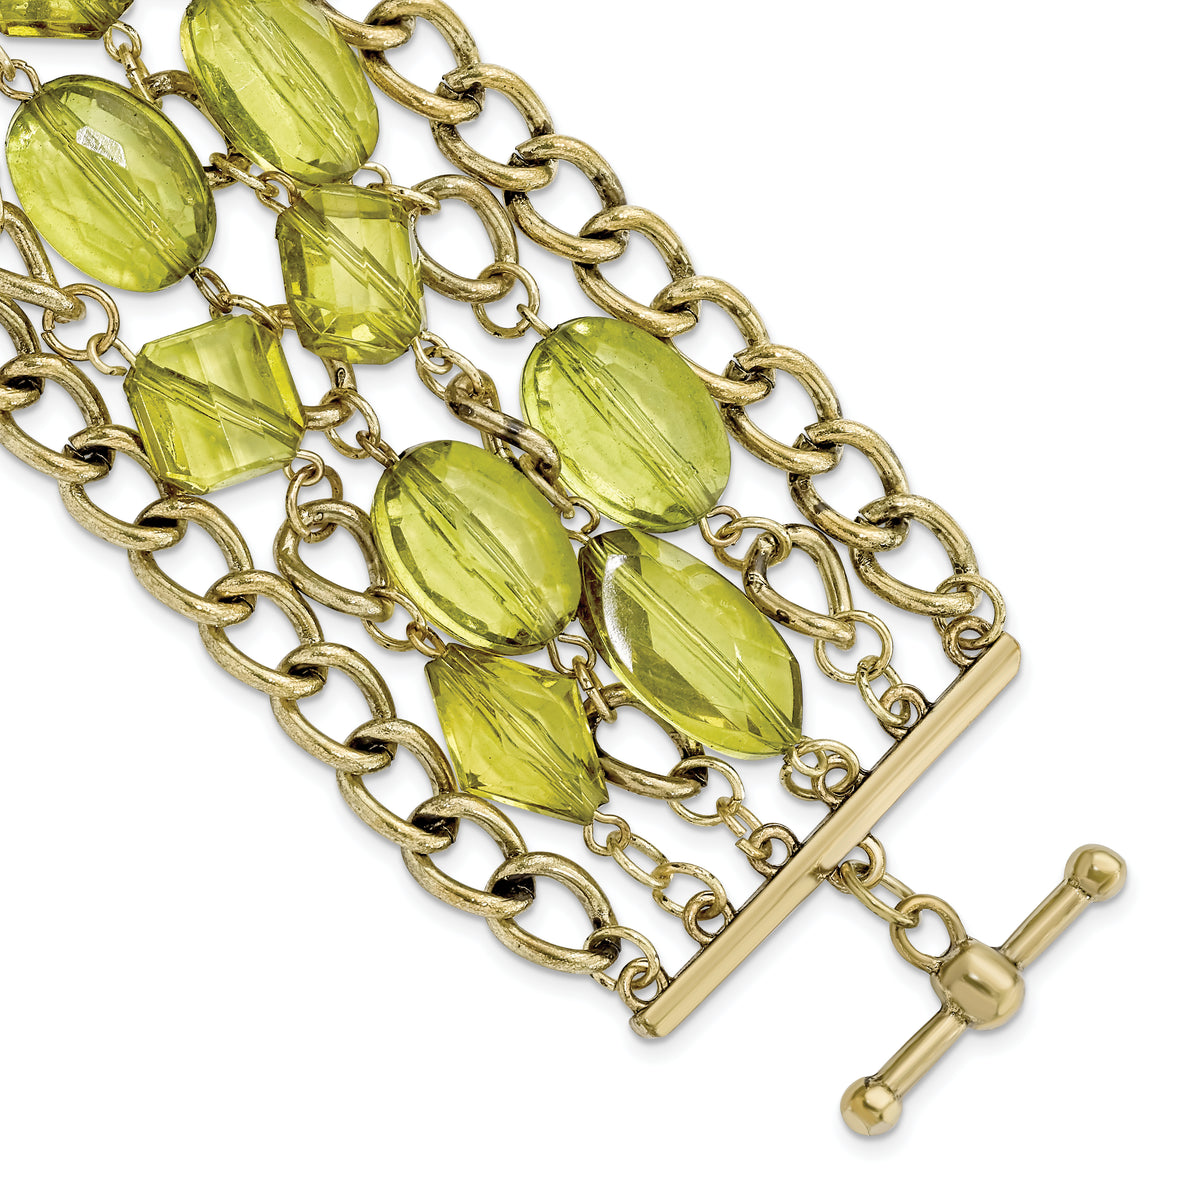 1928 Jewelry Brass-tone Link and Olive Green Faceted Acrylic Beads Wide Six Row 8 inch Toggle Bracelet